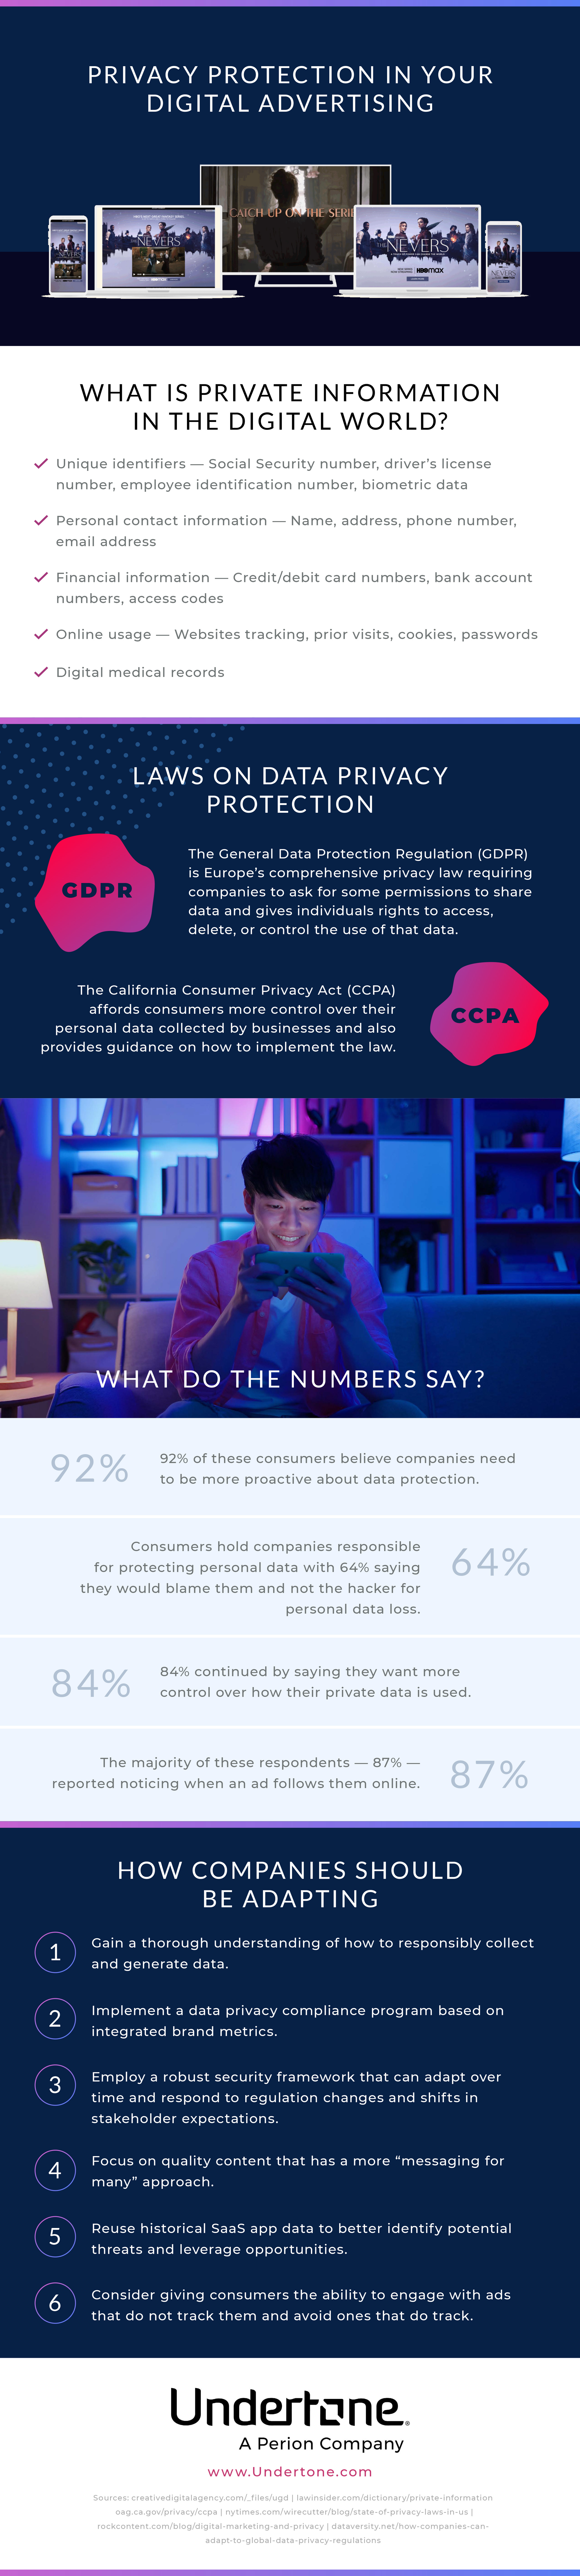 Consumer Data Privacy Infographic 01 Undertone Privacy 02, Industry Today